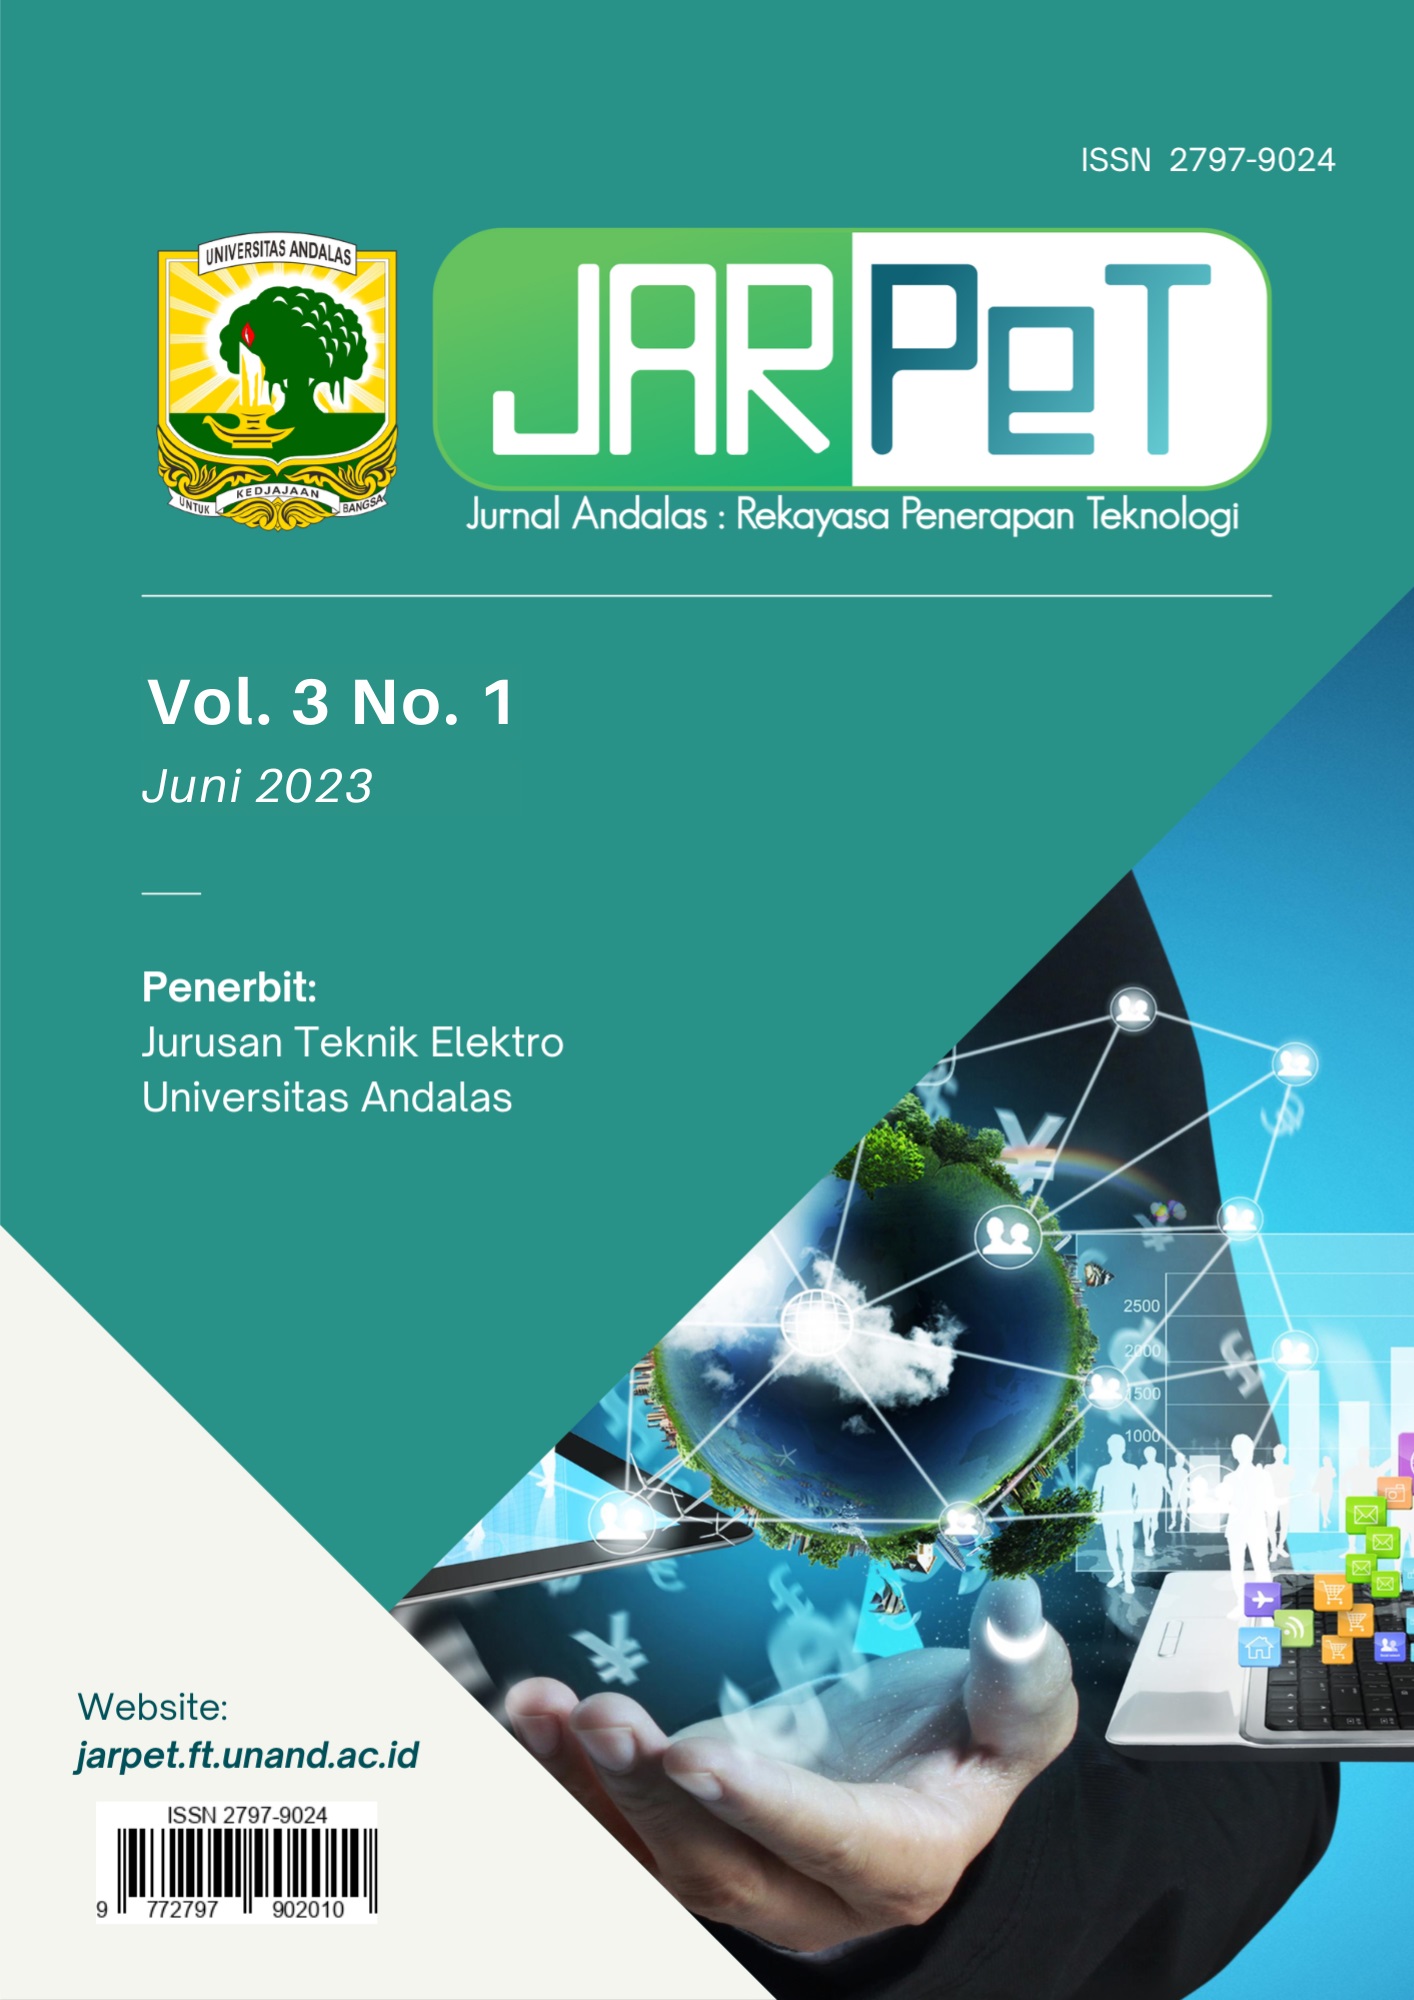 http://jarpet.ft.unand.ac.id/public/journals/1/cover_issue_5_en_US.jpg